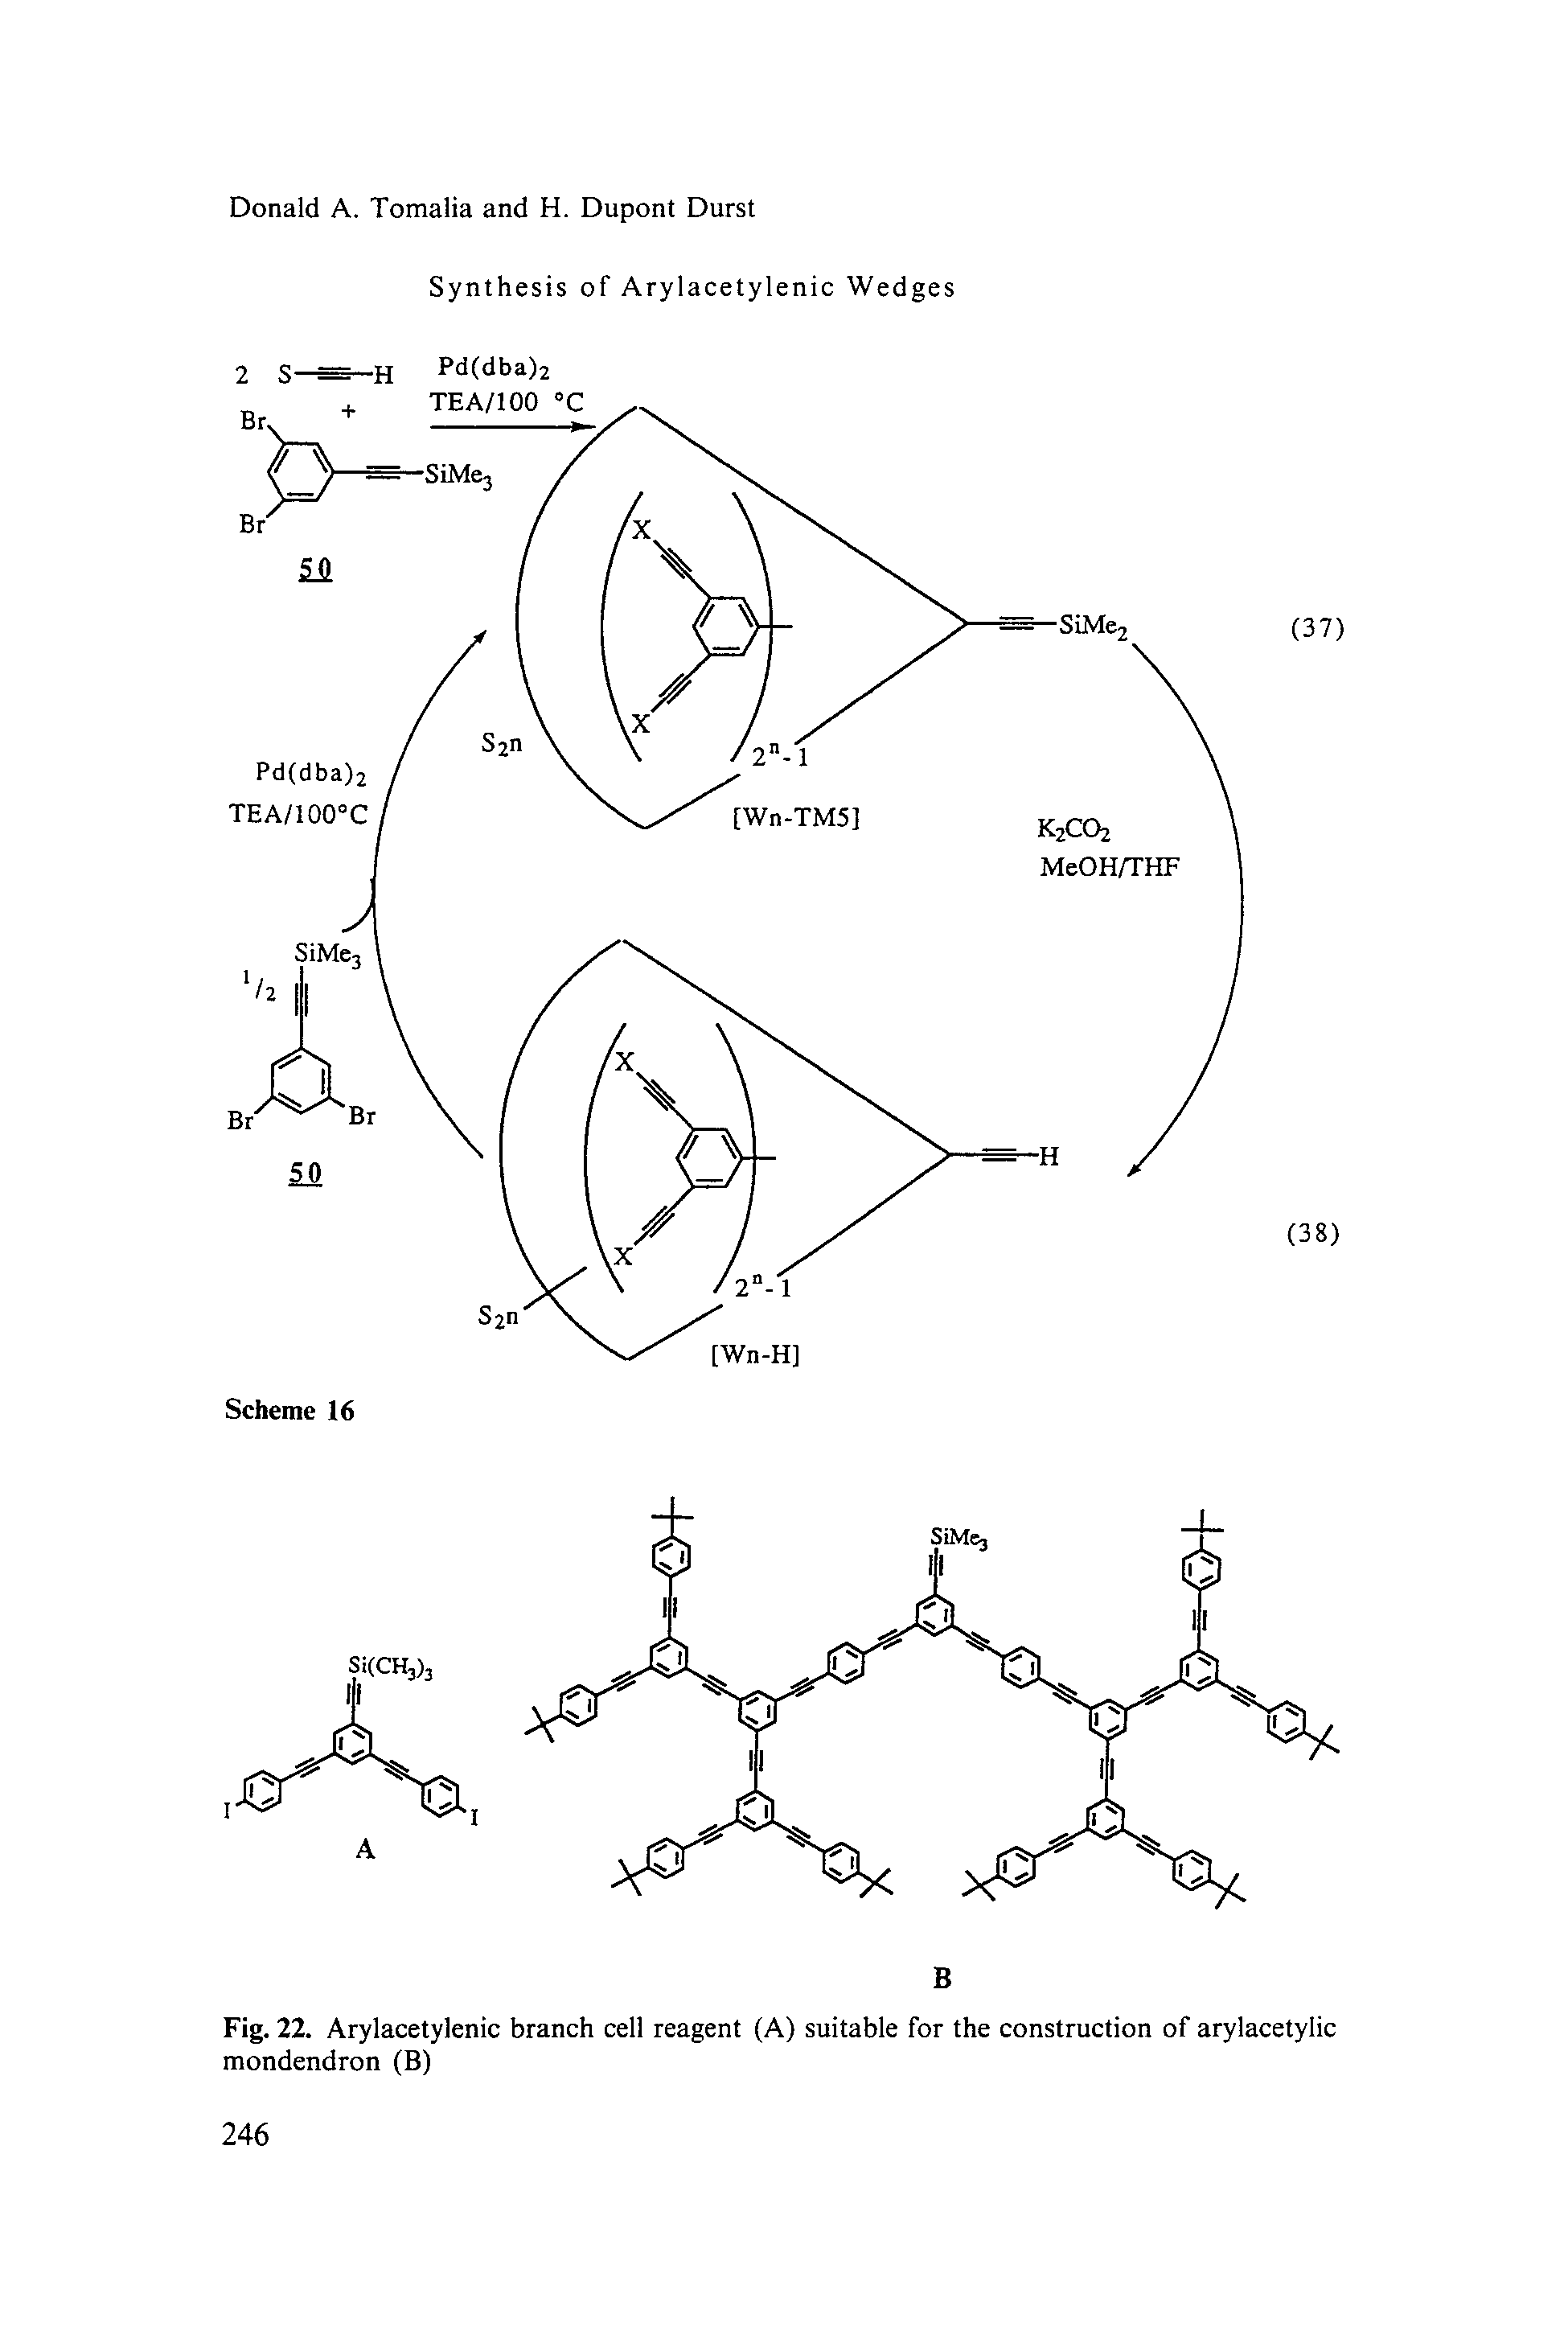 Fig. 22. Arylacetylenic branch cell reagent (A) suitable for the construction of arylacetylic mondendron (B)...